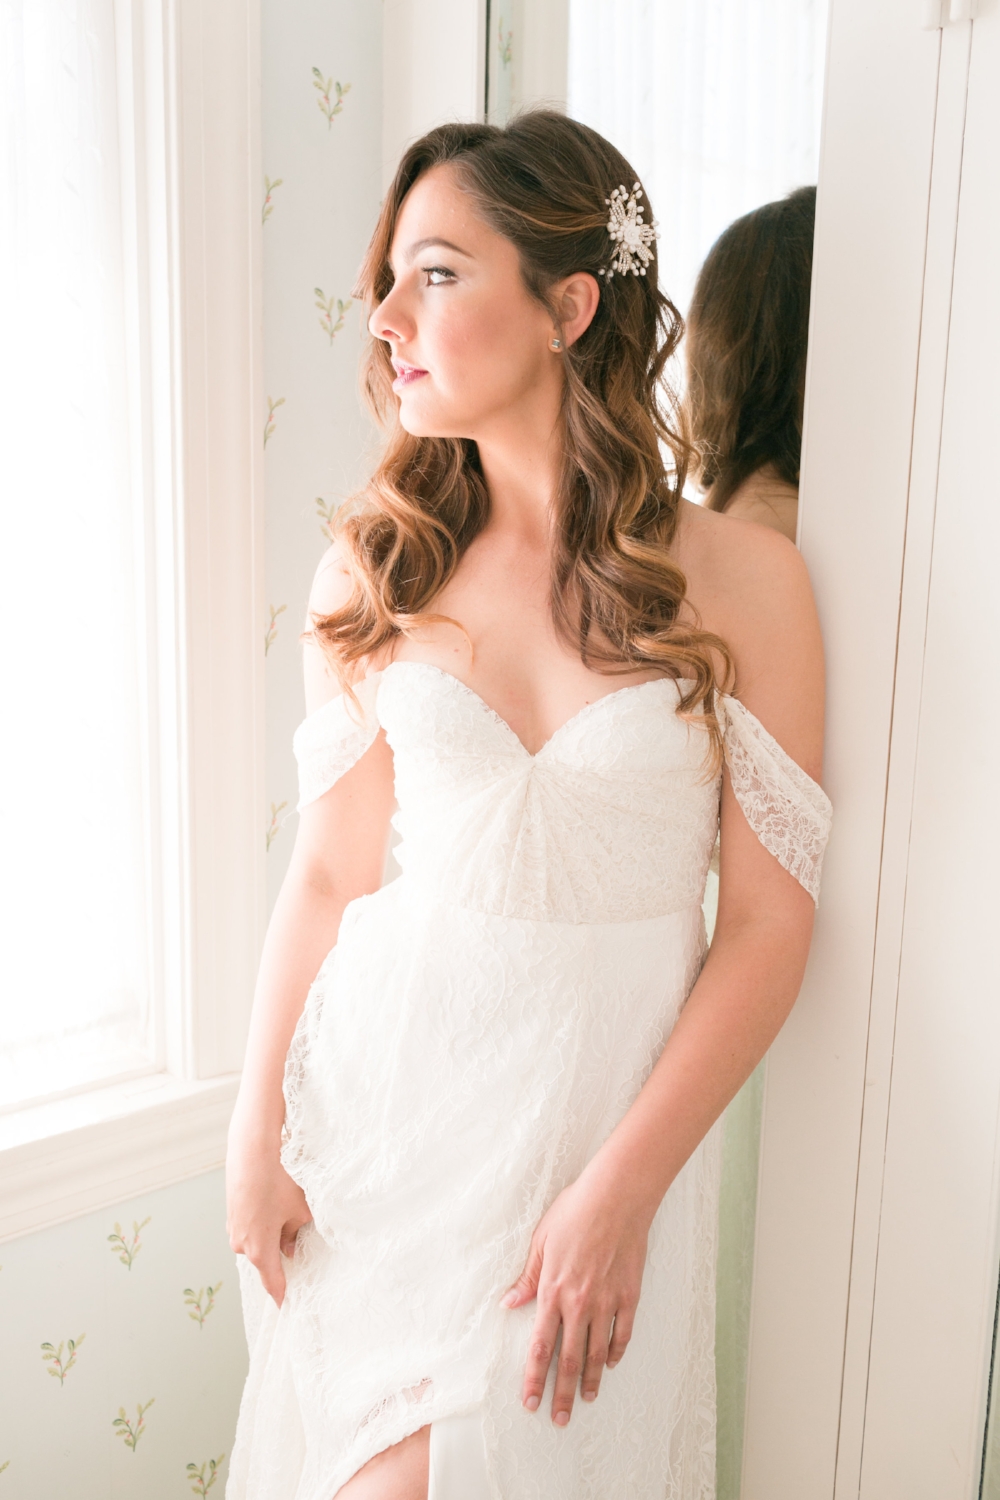 Wedding Photos with Brunette Bride. Long Hairstyle with hair accessory and Natural Makeup. Bridal Beauty by Vanity Belle in Orange County (Costa Mesa) and San Diego (La Jolla)